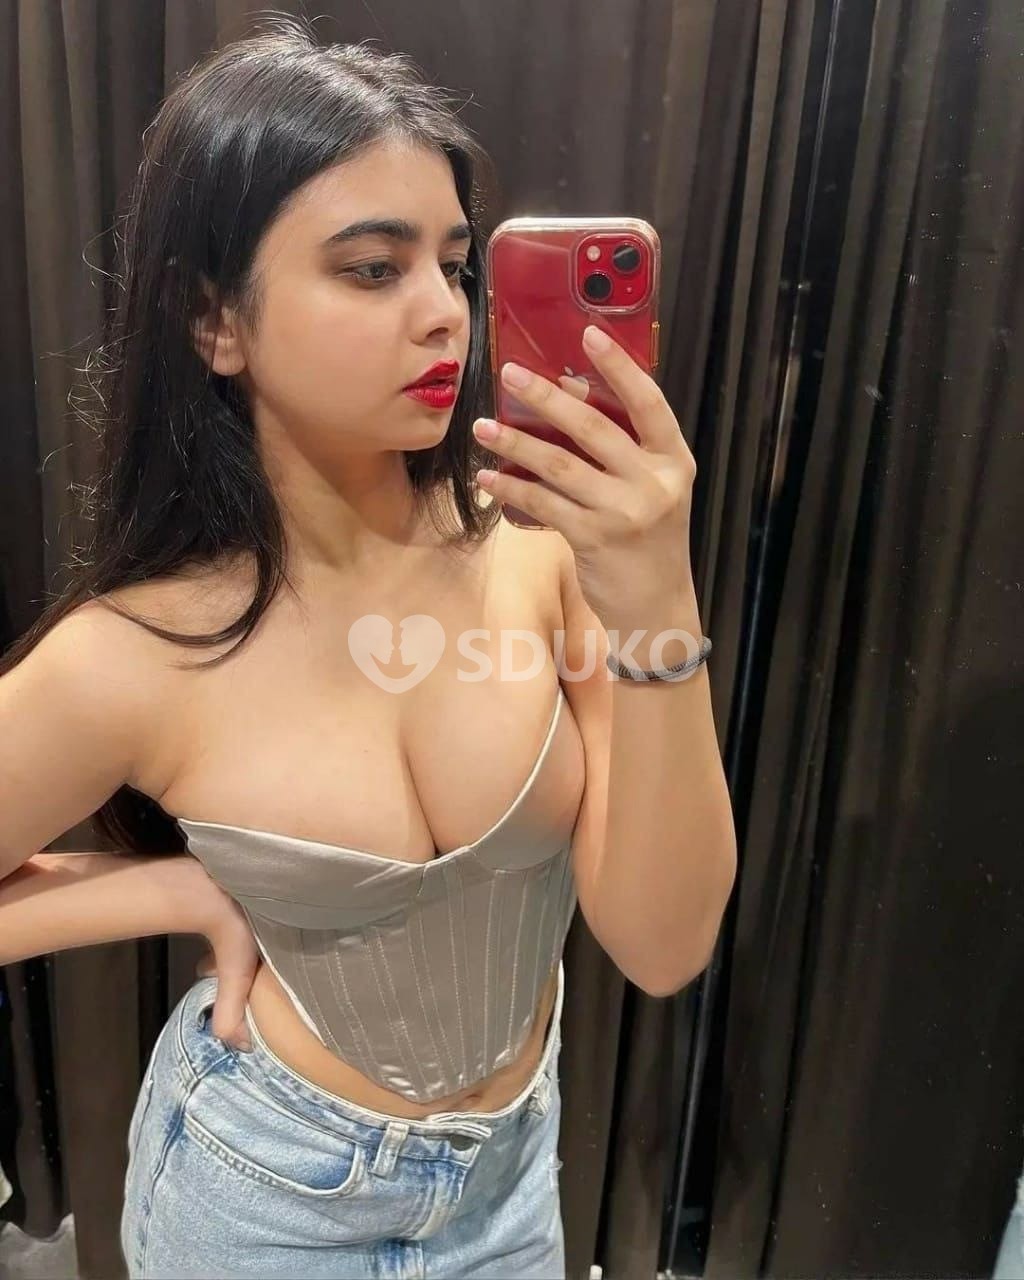 Bangalore vip genuine in ⭐⭐⭐💯 Royal Eskort Sarvice Safe and secure service low price High profile girls avauy